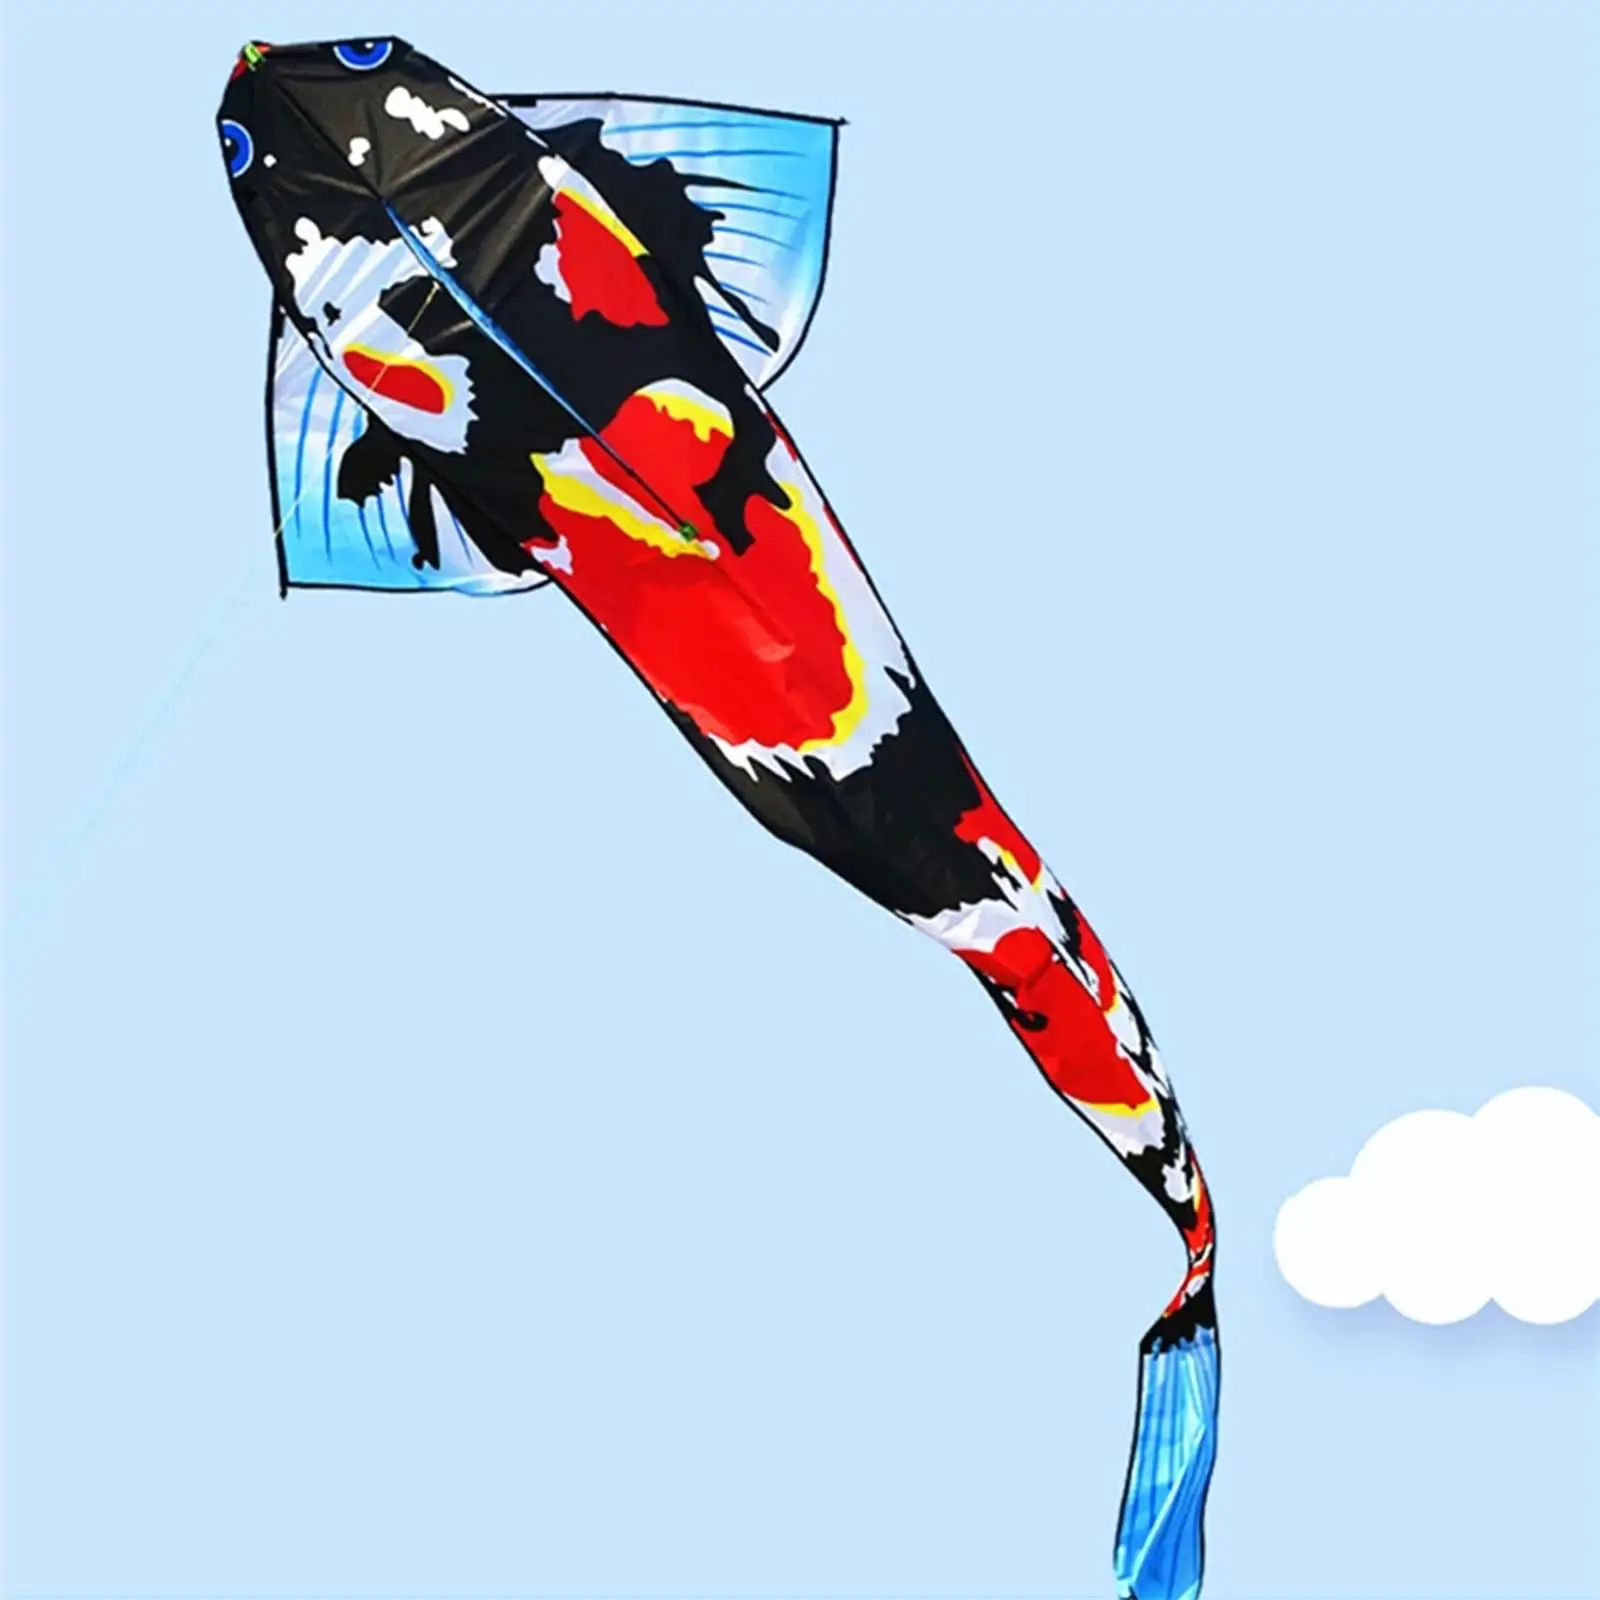 long tail kite with 100m line 3D single line kite to fly easily for outdoor